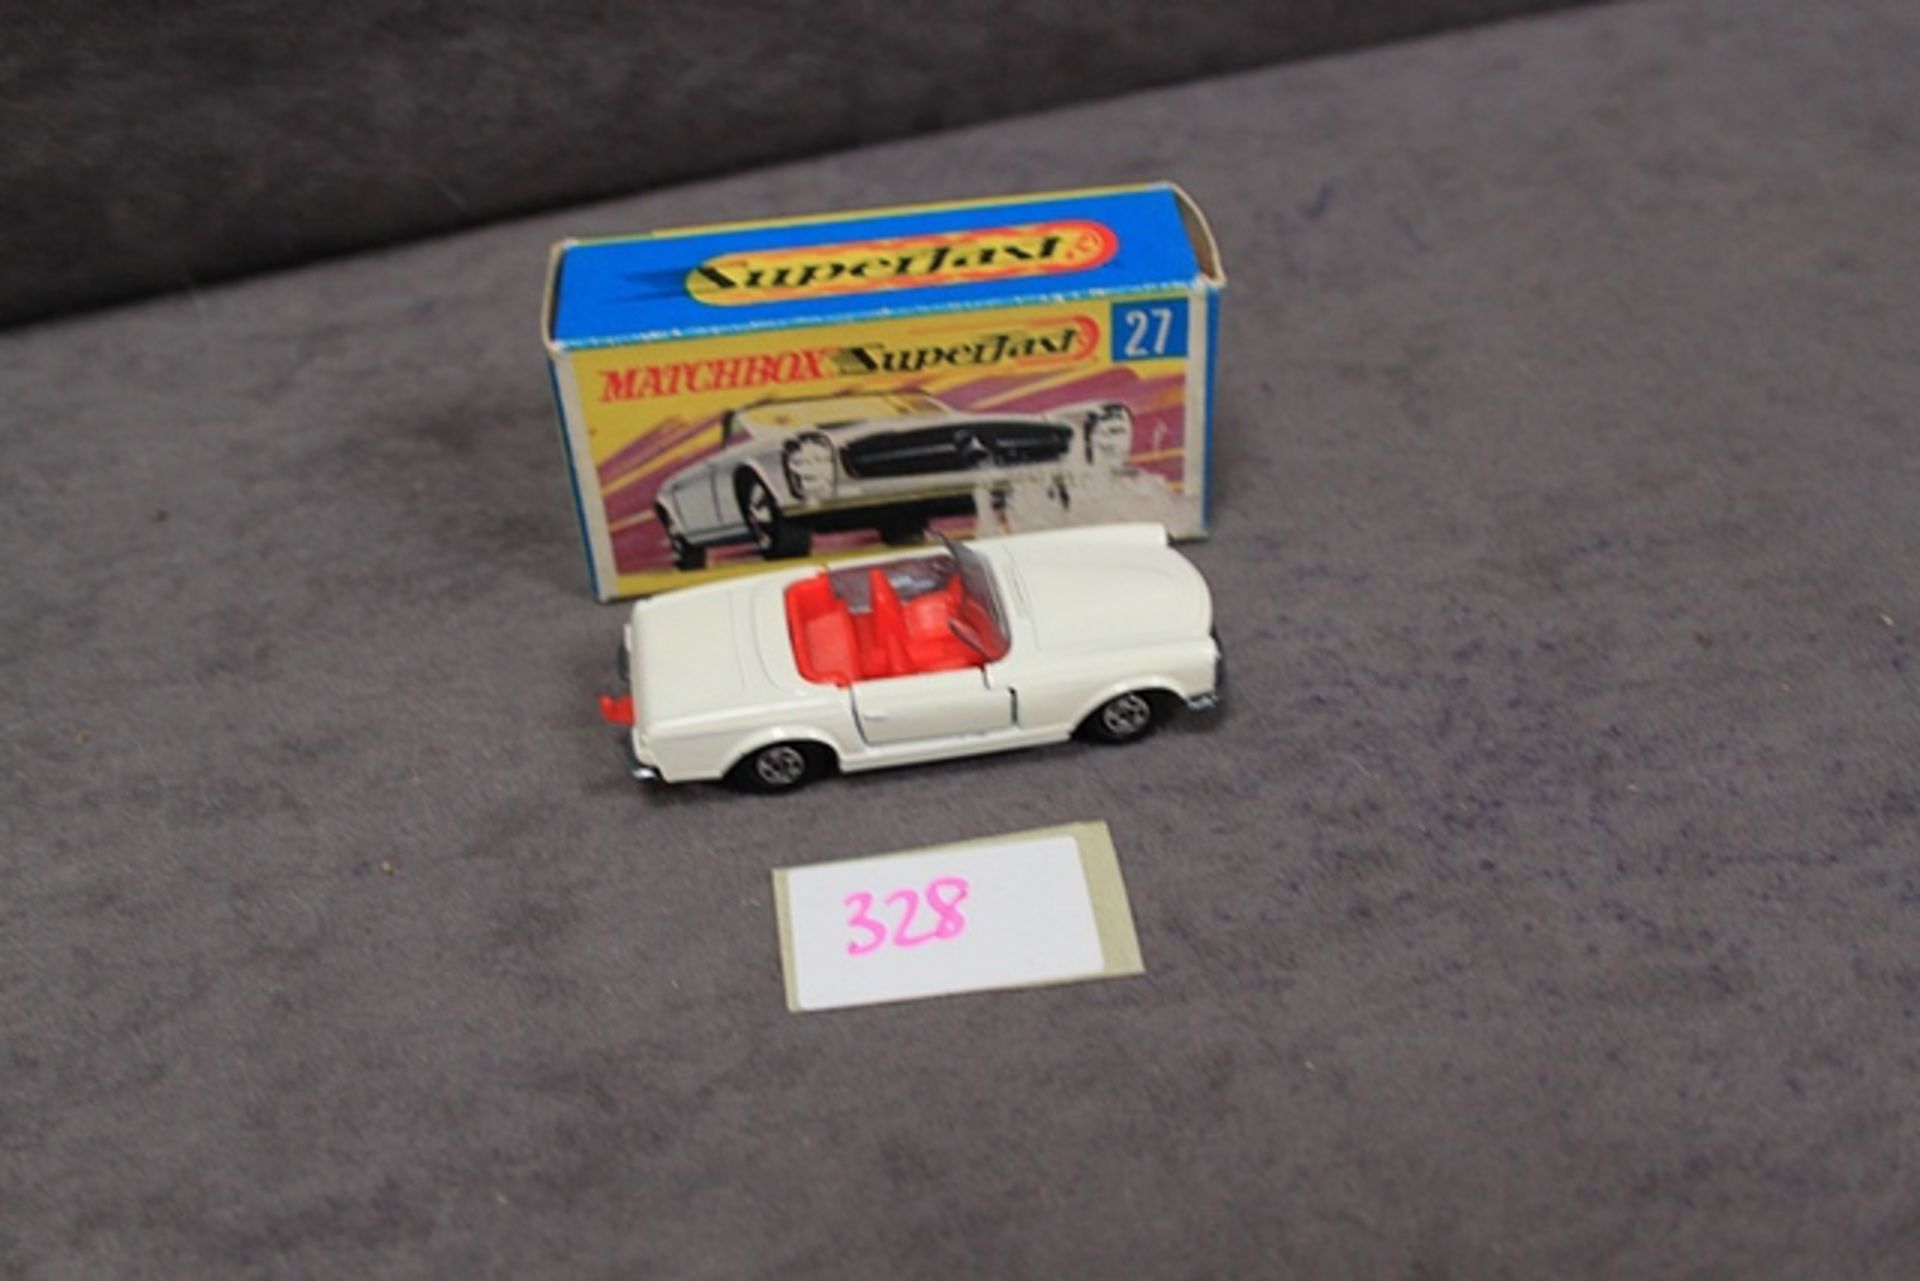 Mint Matchbox Superfast diecast #27 White body red interior and unpainted basein excellent box - Image 2 of 2